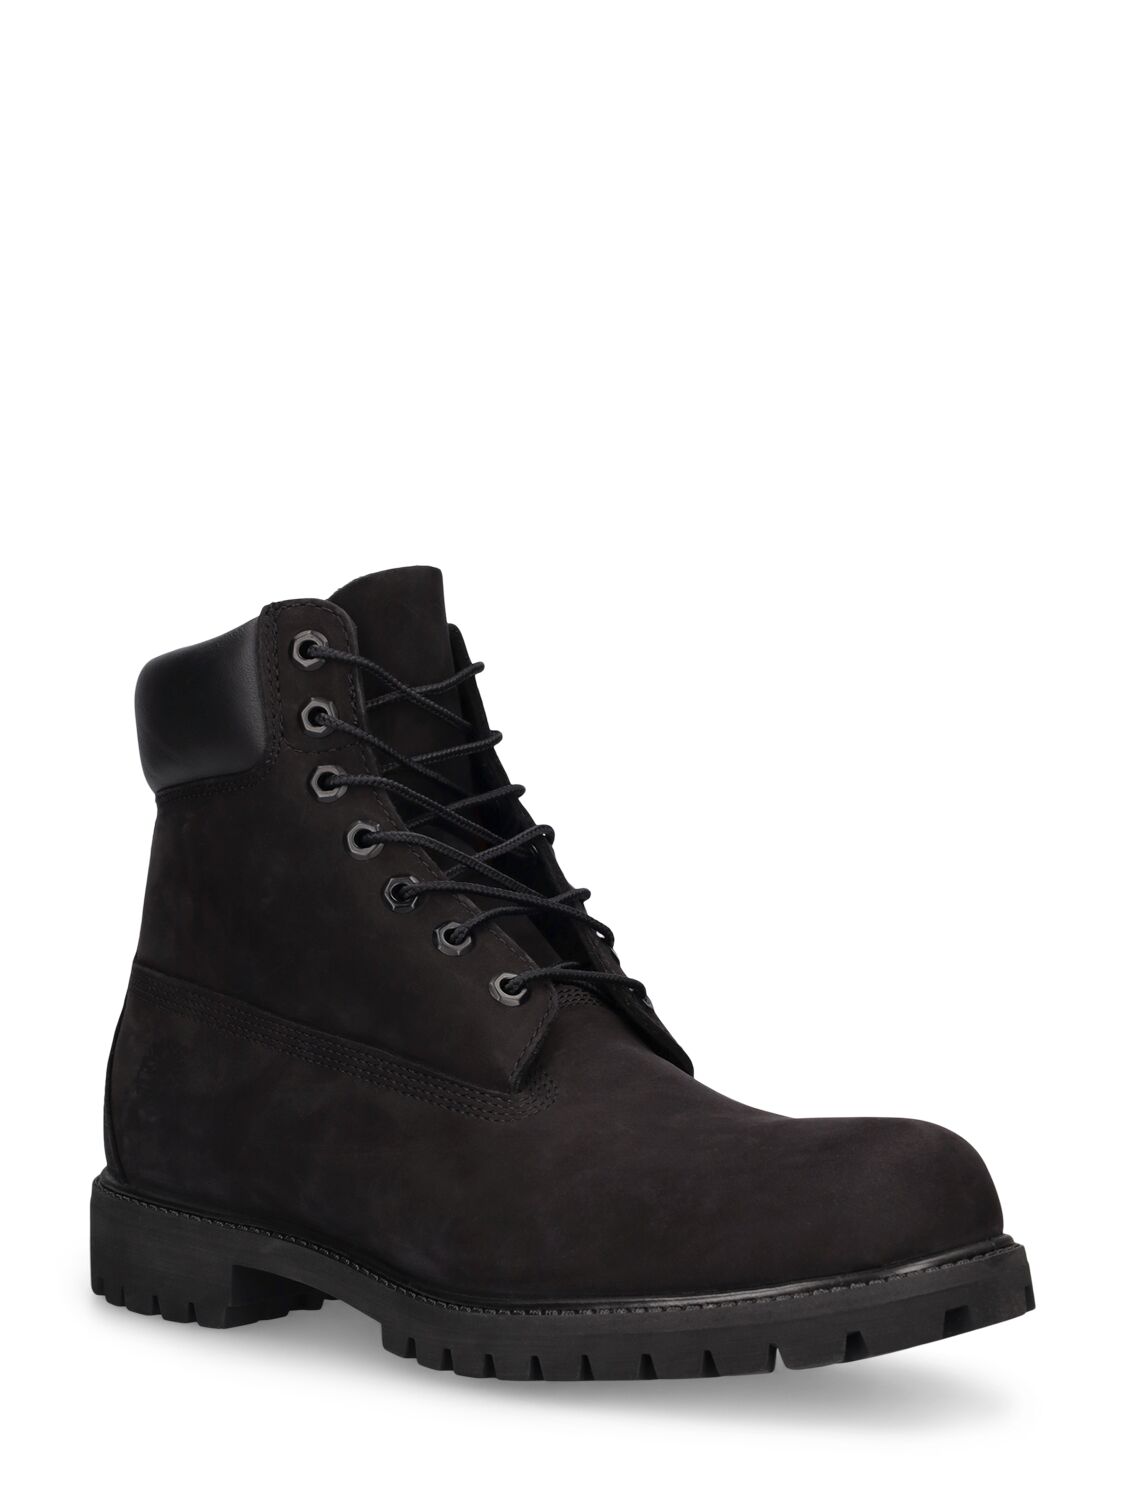 Shop Timberland 6 Inch Premium Waterproof Lace-up Boots In Black